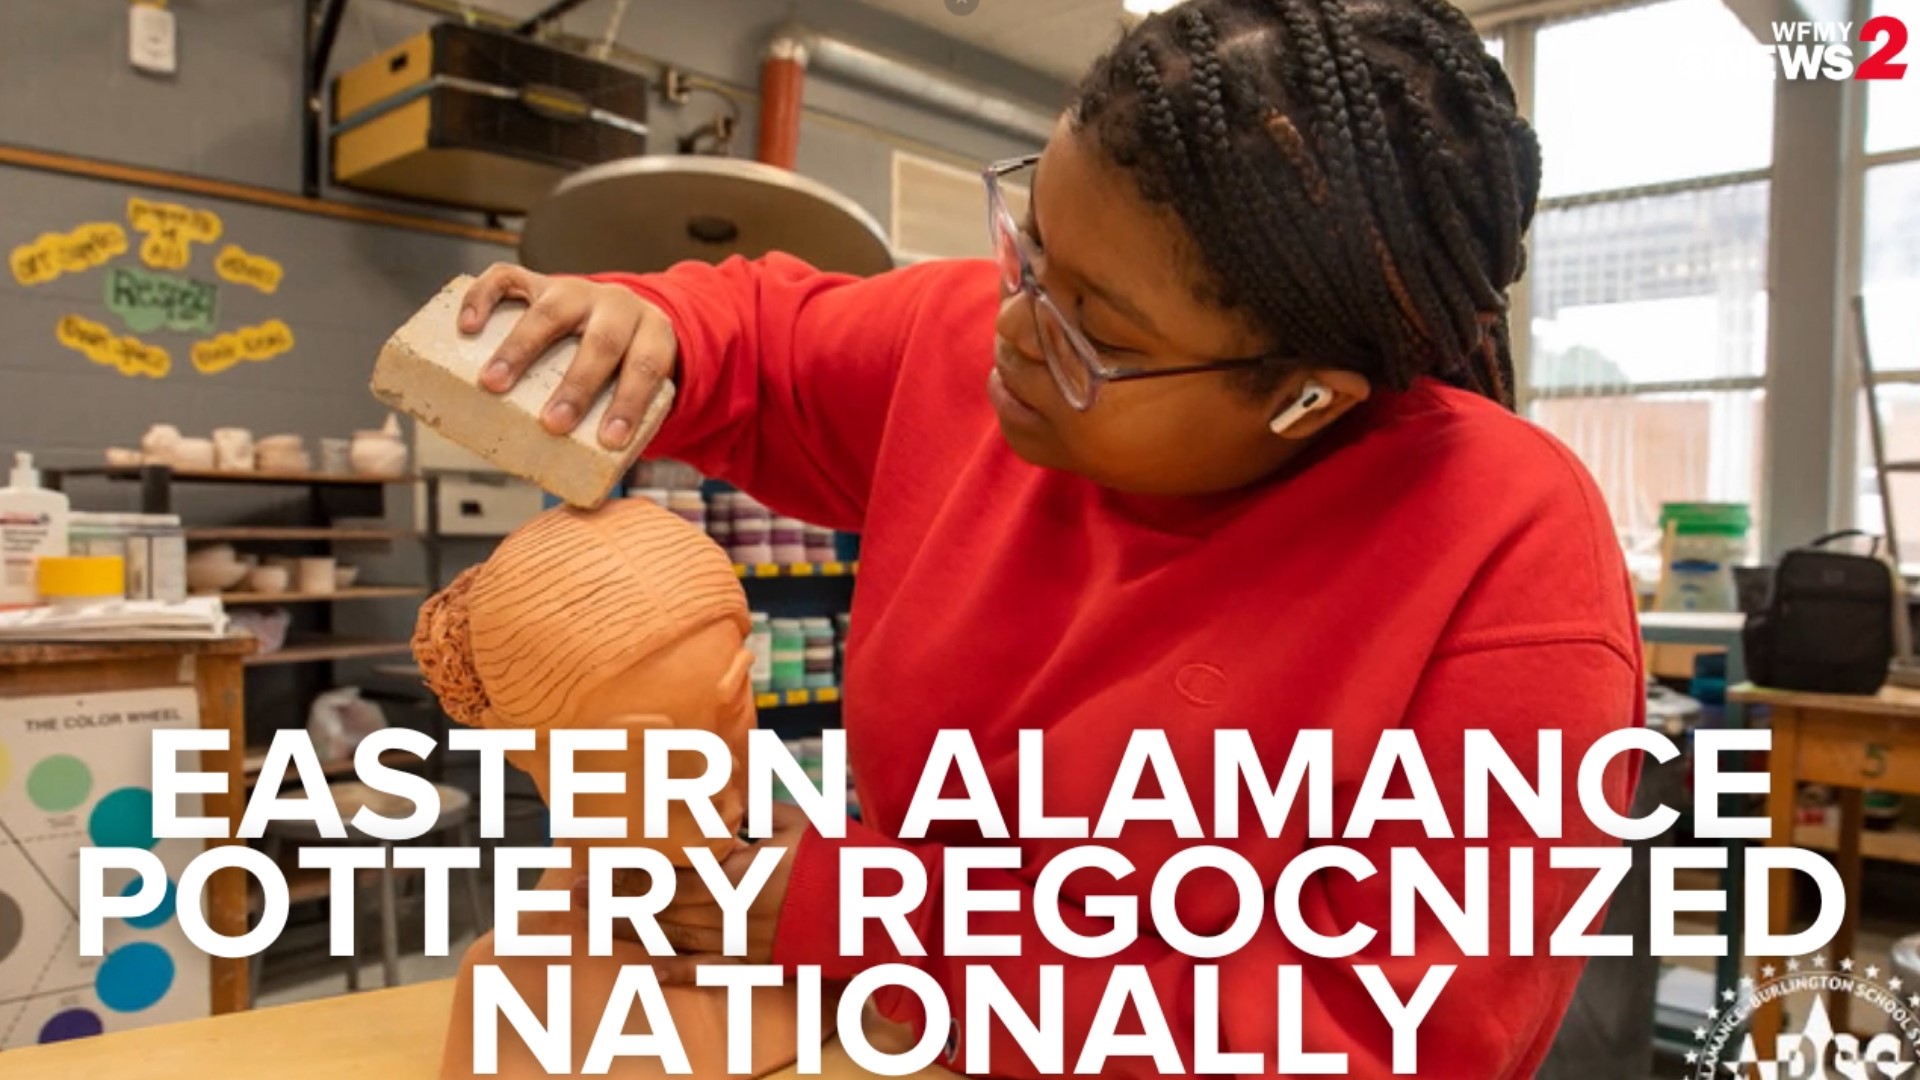 Pottery students at Eastern Alamance High School are getting recognized on a national level for their artwork.